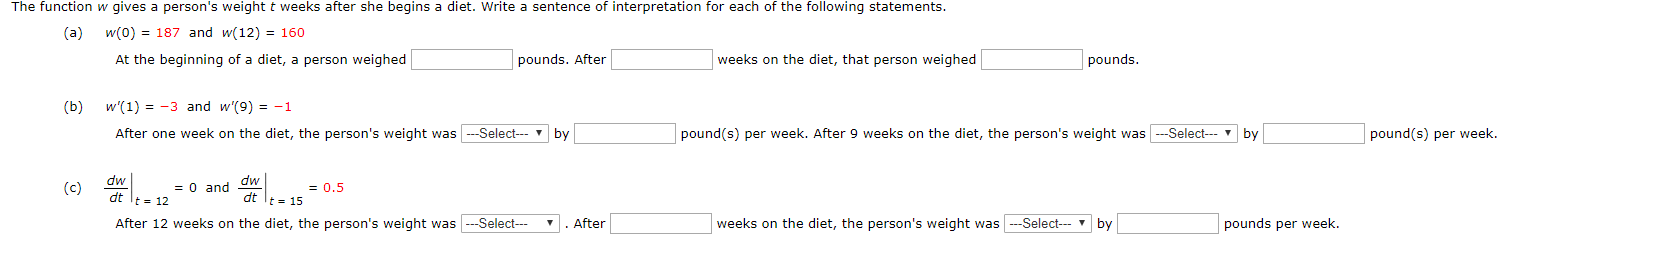 The function w gives a person's weight t weeks after she begins a diet. Write a sentence of interpretation for each of the following statements.
w(0) 187 and w(12) 160
(a)
pounds. After
weeks on the diet, that person weighed
At the beginning of a diet, a person weighed
pounds.
w'(1) 3 and w'(9) = -1
(b)
pound(s) per week. After 9 weeks on the diet, the person's weight was-Select-by
pound(s) per week.
After one week on the diet, the person's weight wasSelect- v
by
dw
(c)
= 0 and dw
=0.5
dt t 15
t 12
After 12 weeks on the diet, the person's weight wasSelect
weeks on the diet, the person's weight wasSelect
pounds per week.
After
by
